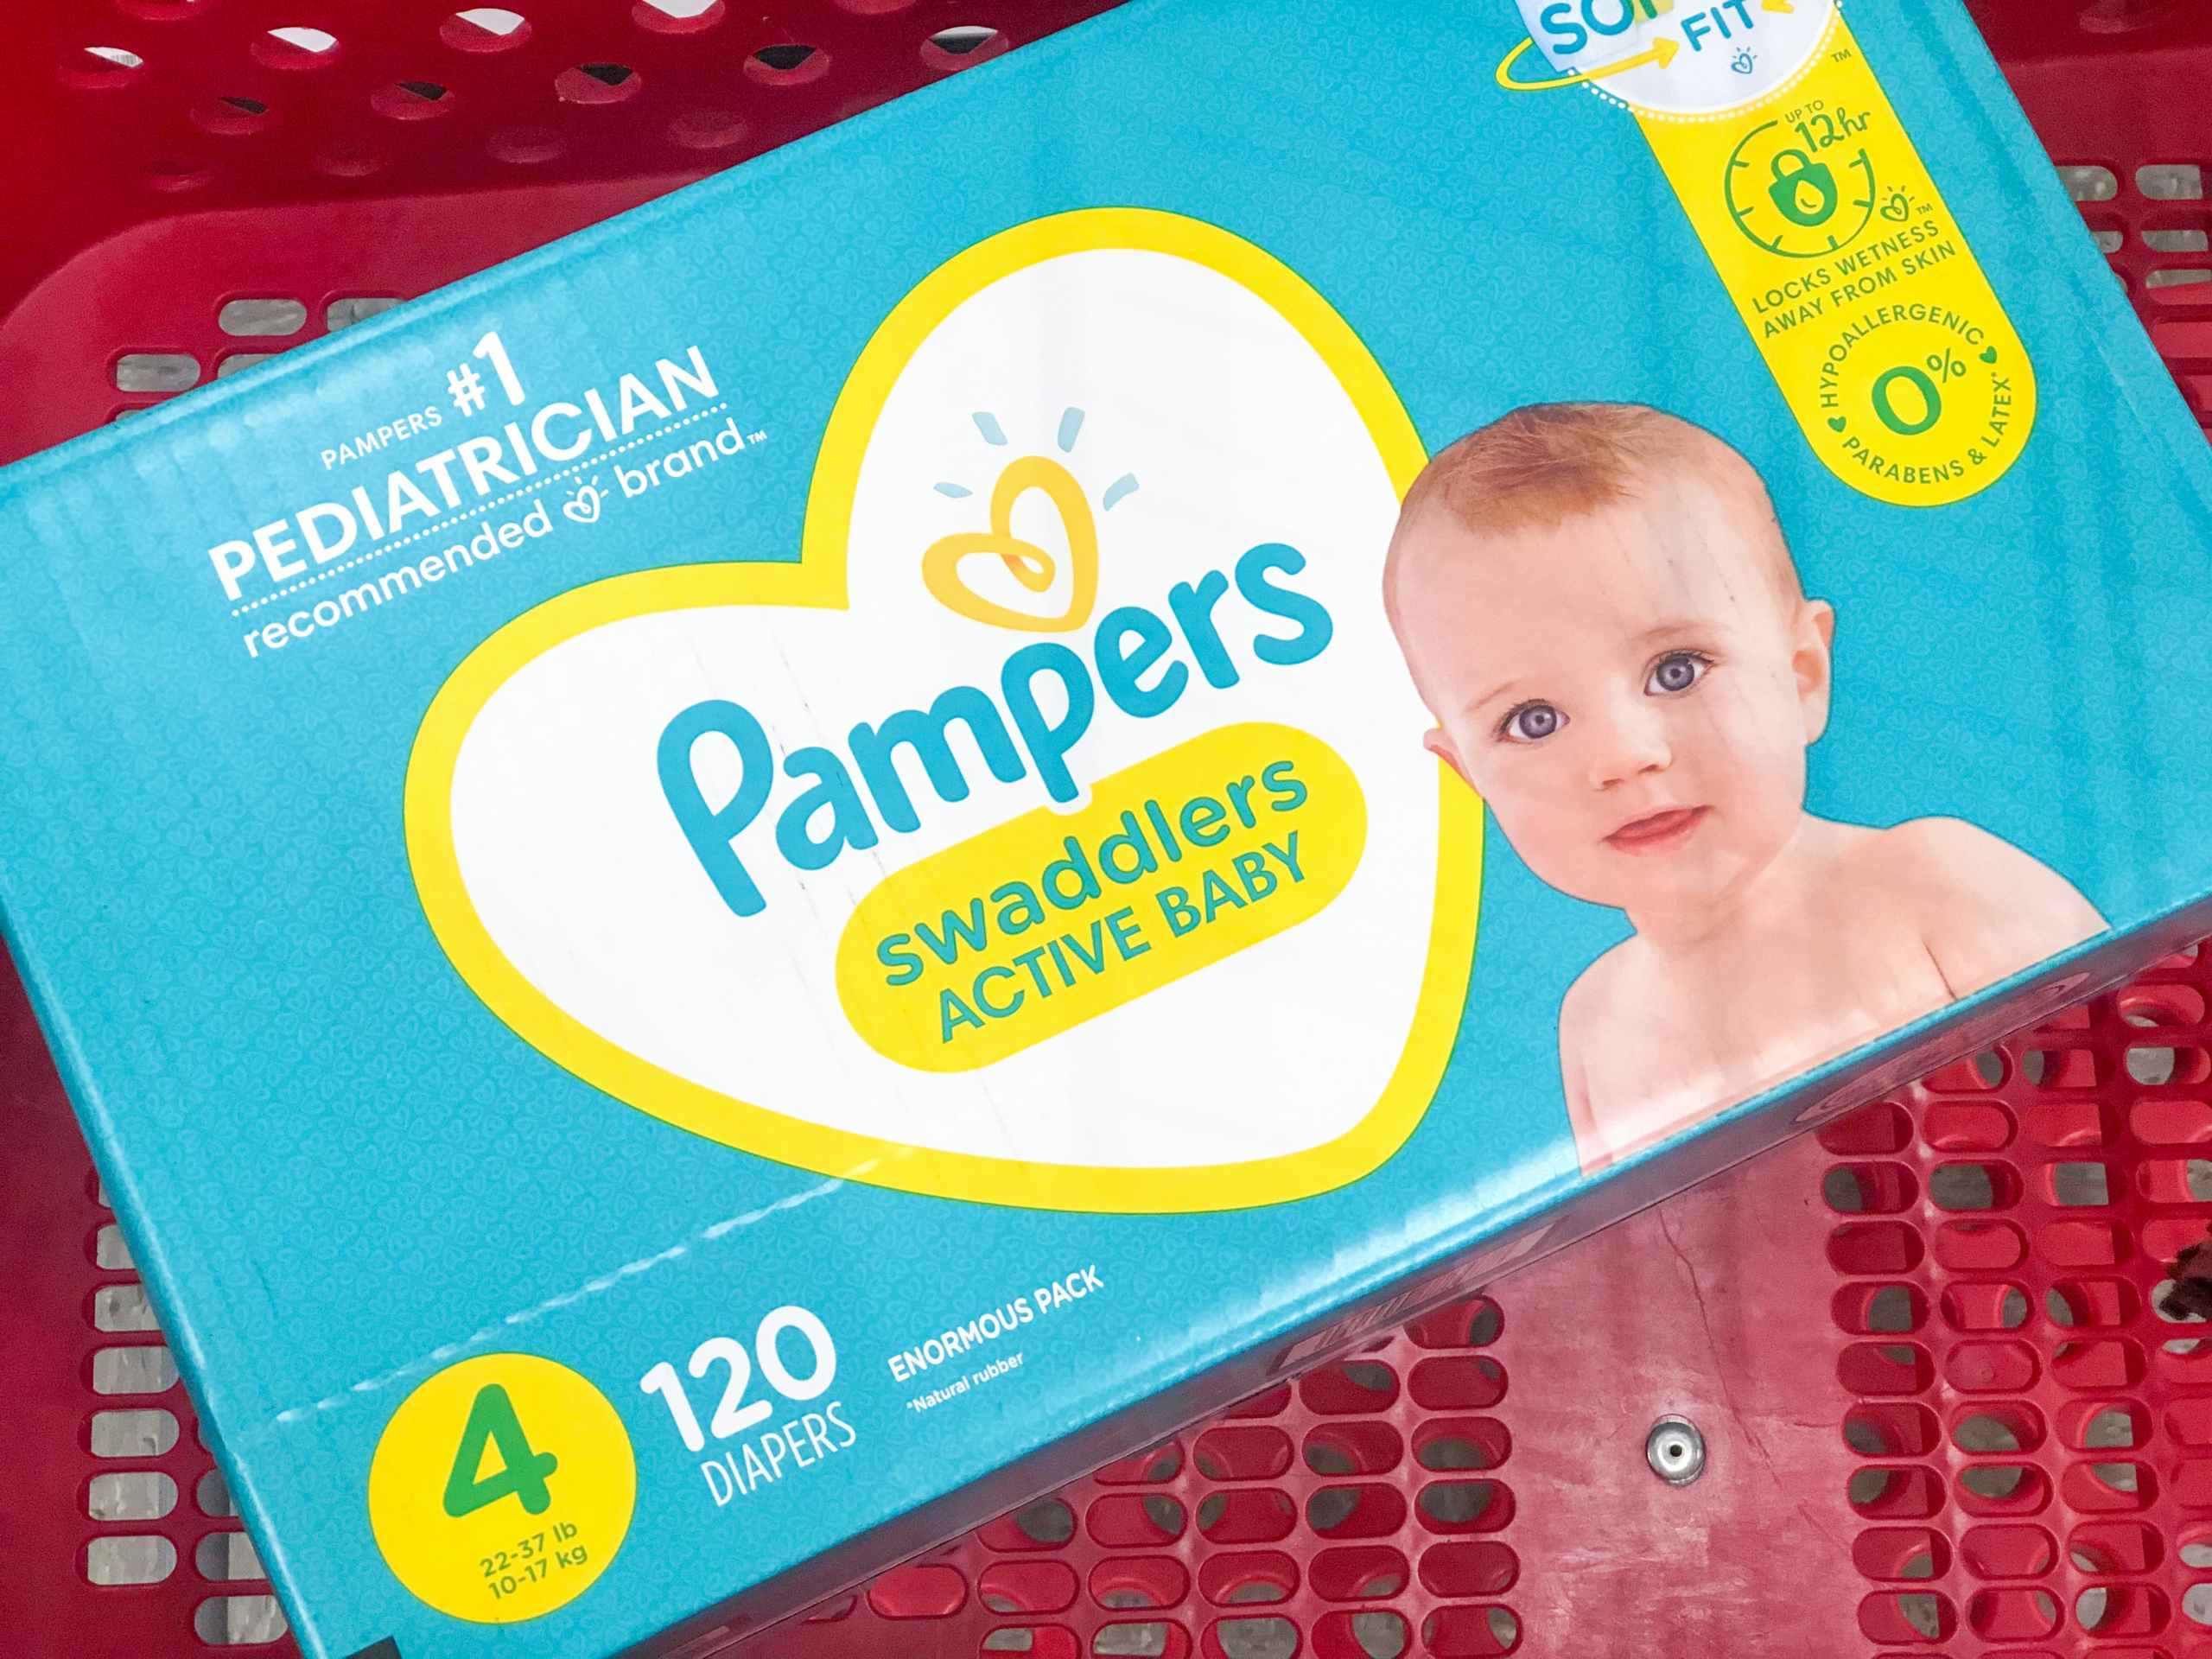 Pampers boxes in shopping cart